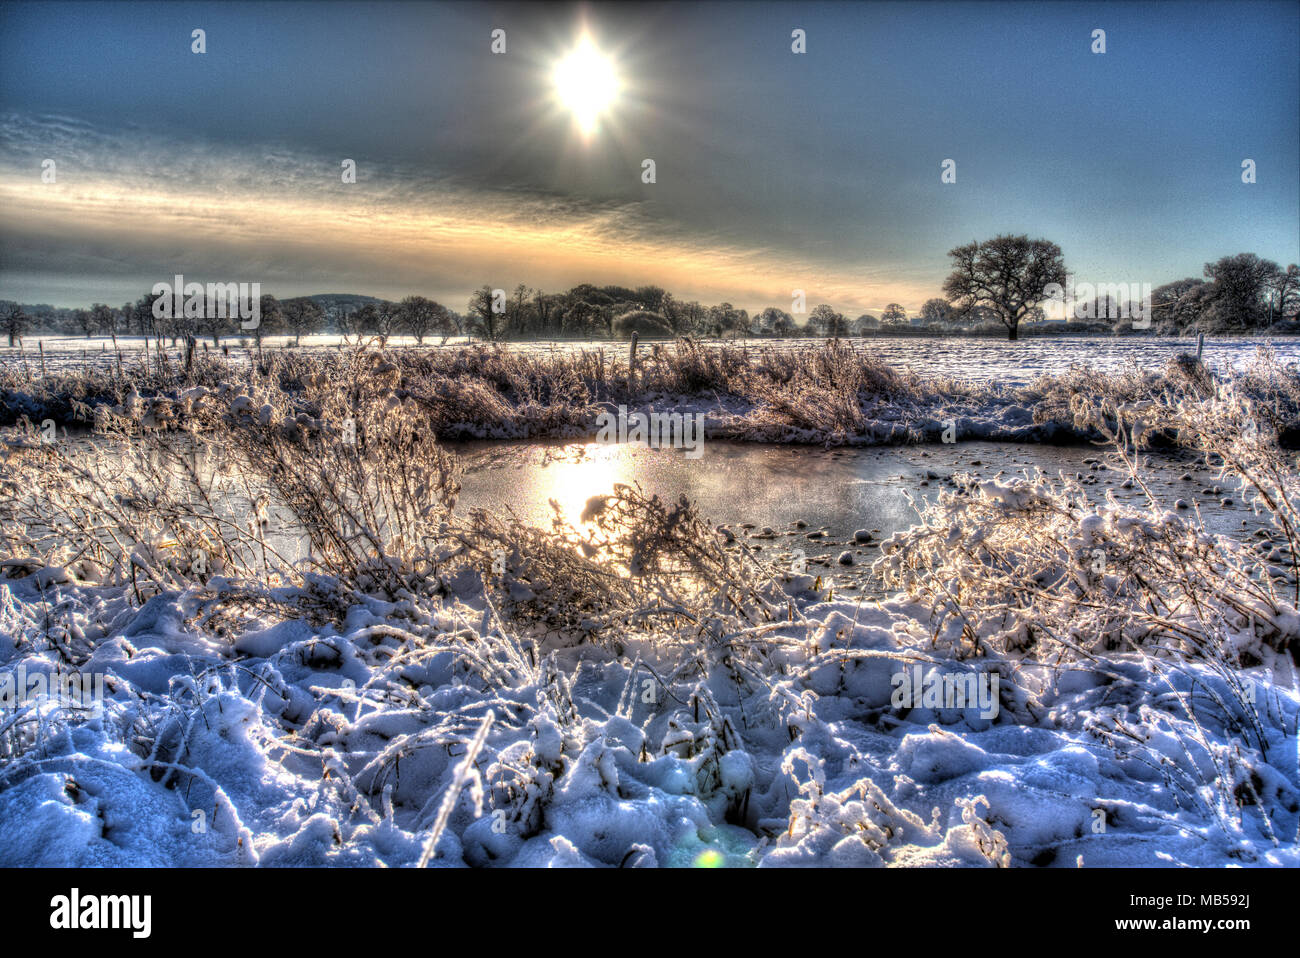 Village of Coddington, England. Artistic winter view over a pasture farming field and freshwater pond, in rural Cheshire. Stock Photo